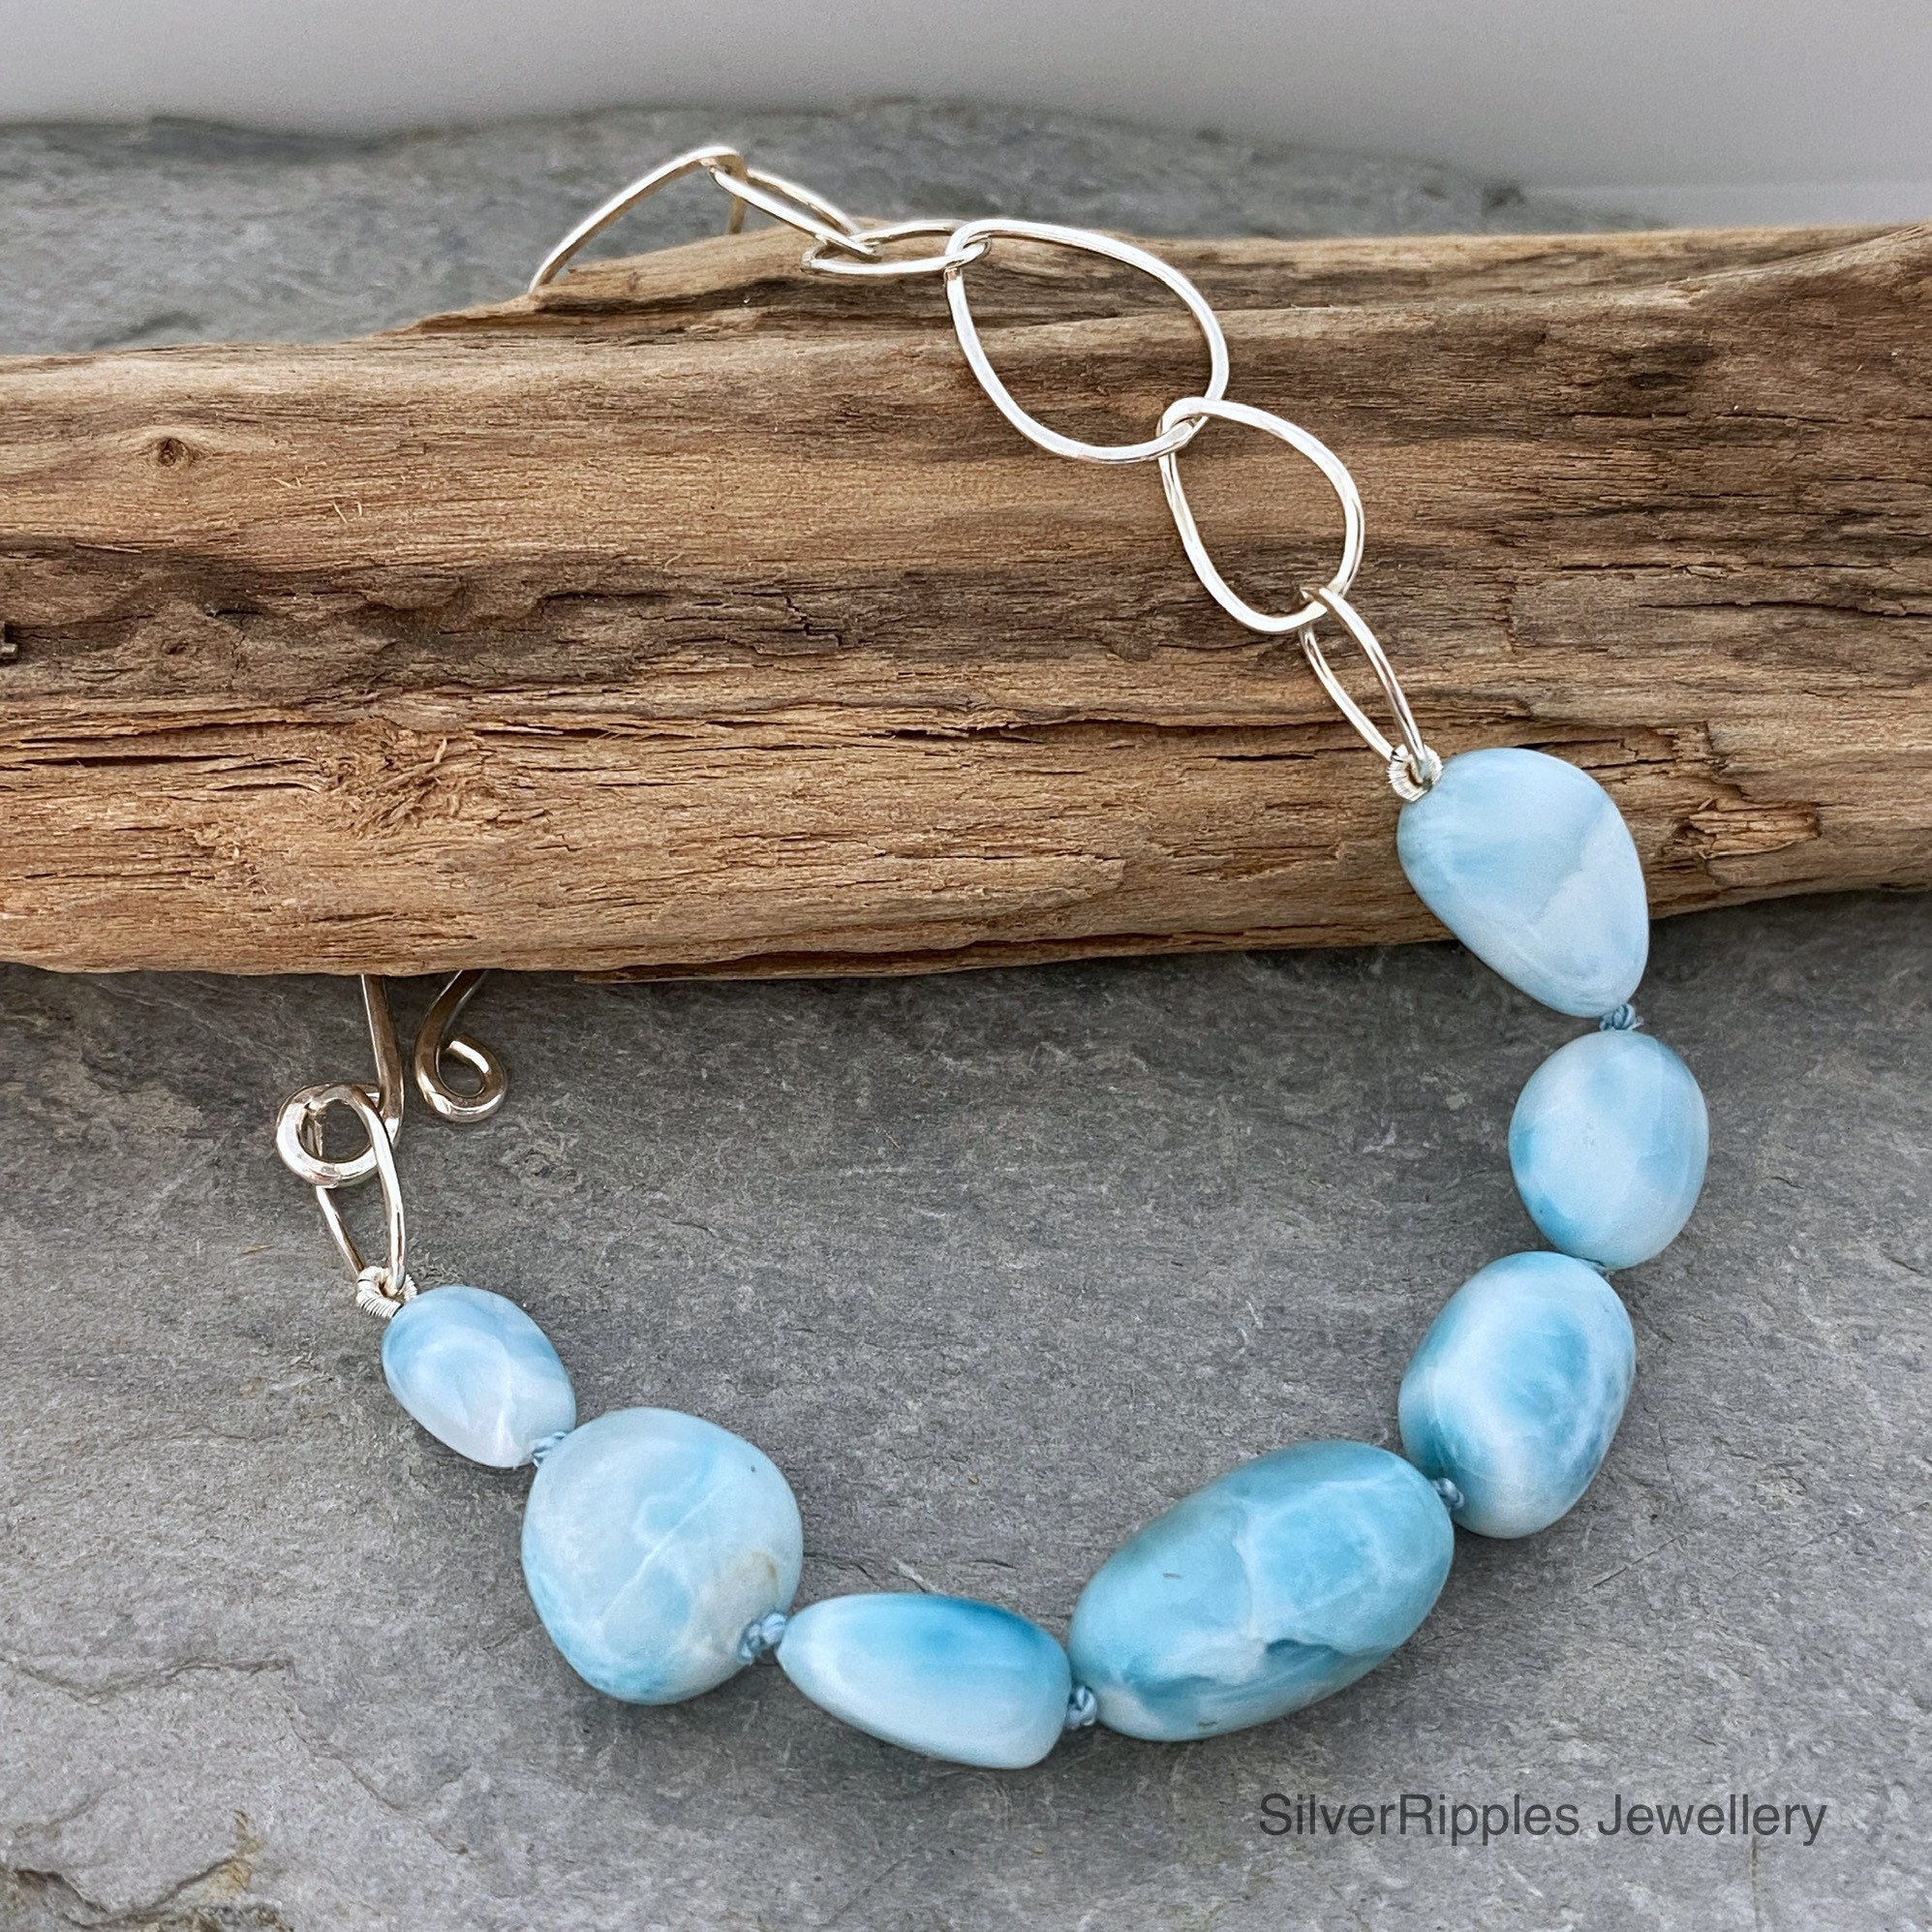 Silver Chain Bracelet With Raindrop Shaped Links & Turquoise Larimar Beads, Silver Links, Handmade